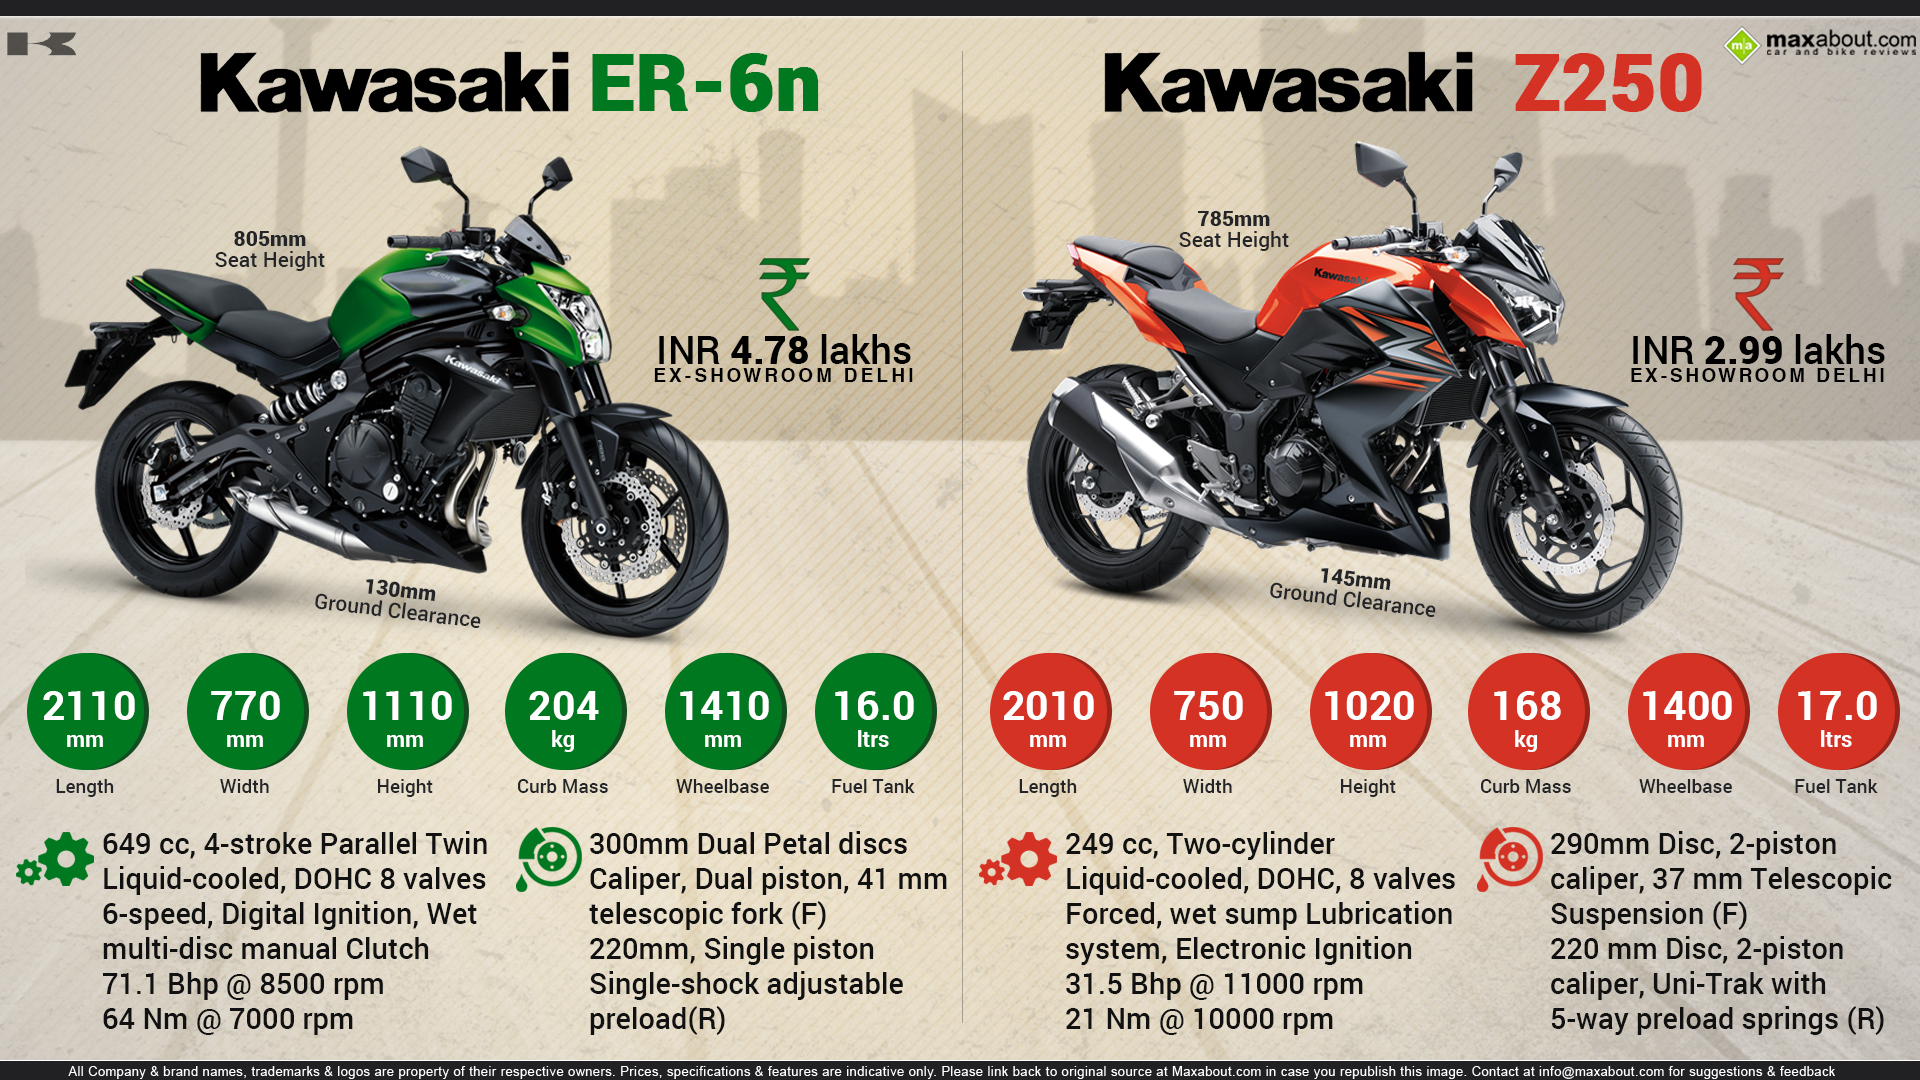 All You Need to Know about Kawasaki Z250 & ER-6n